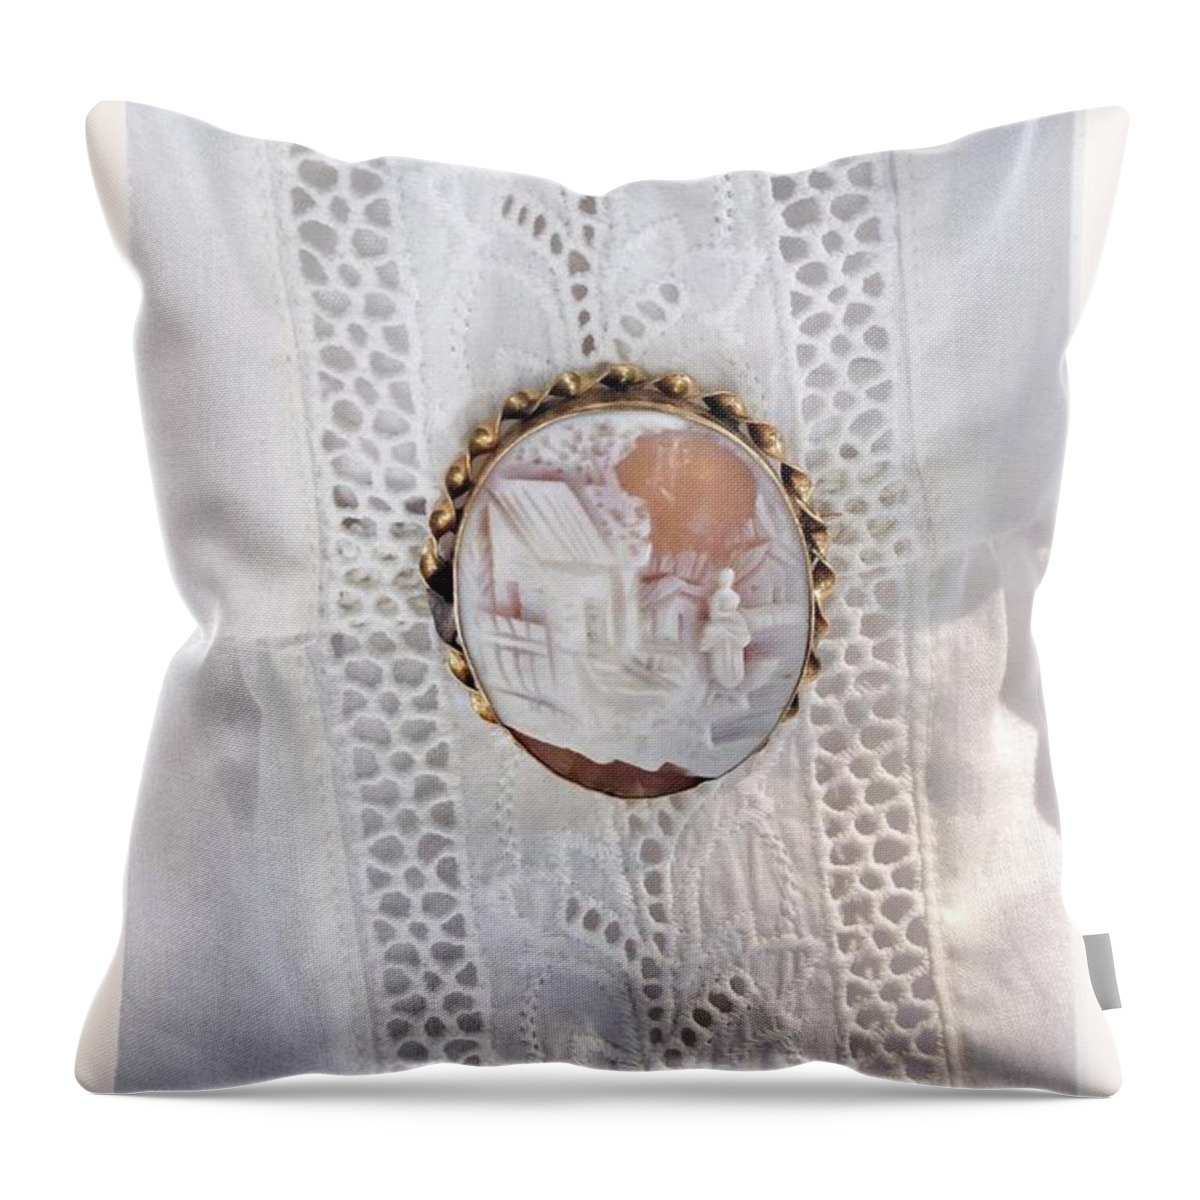 Cameo Lace Throw Pillow featuring the photograph Cameo Lace by Susan Garren